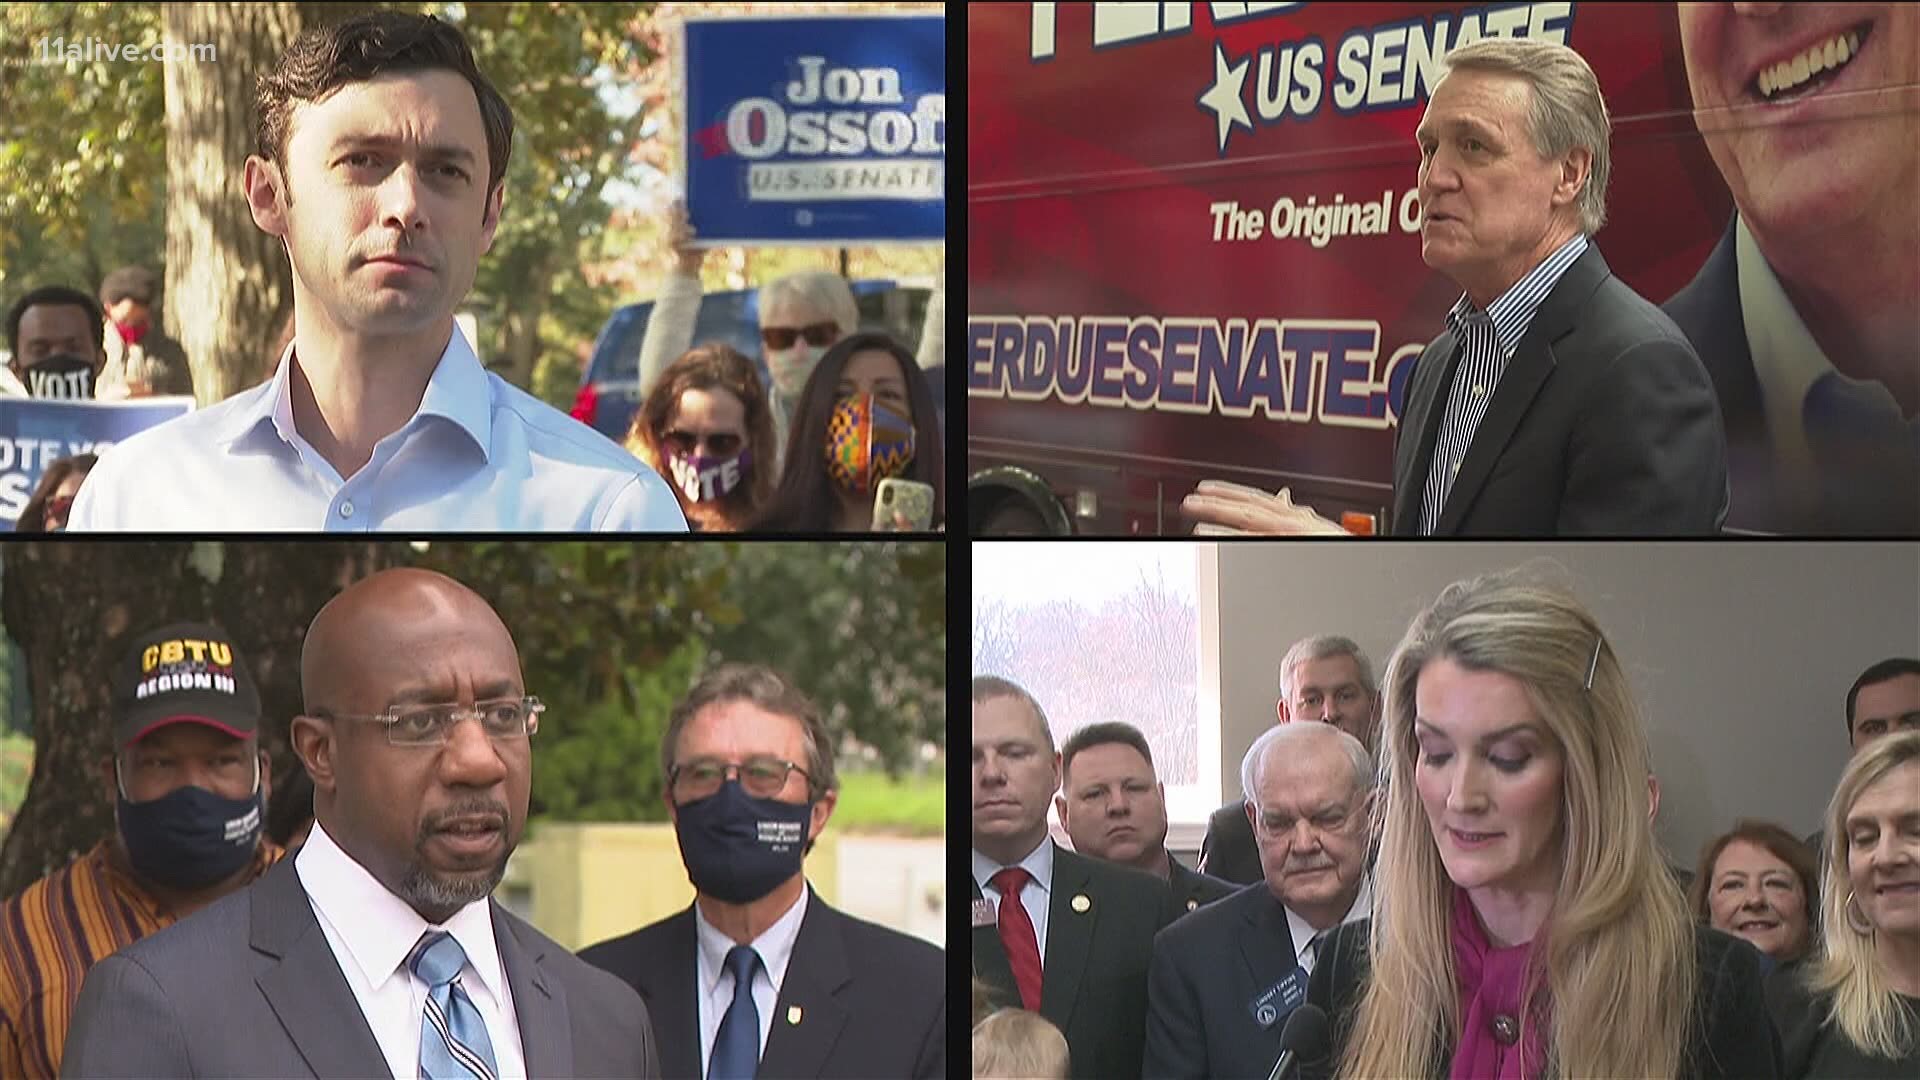 With just one month before the big day, both parties continue to hit the campaign trail hard.